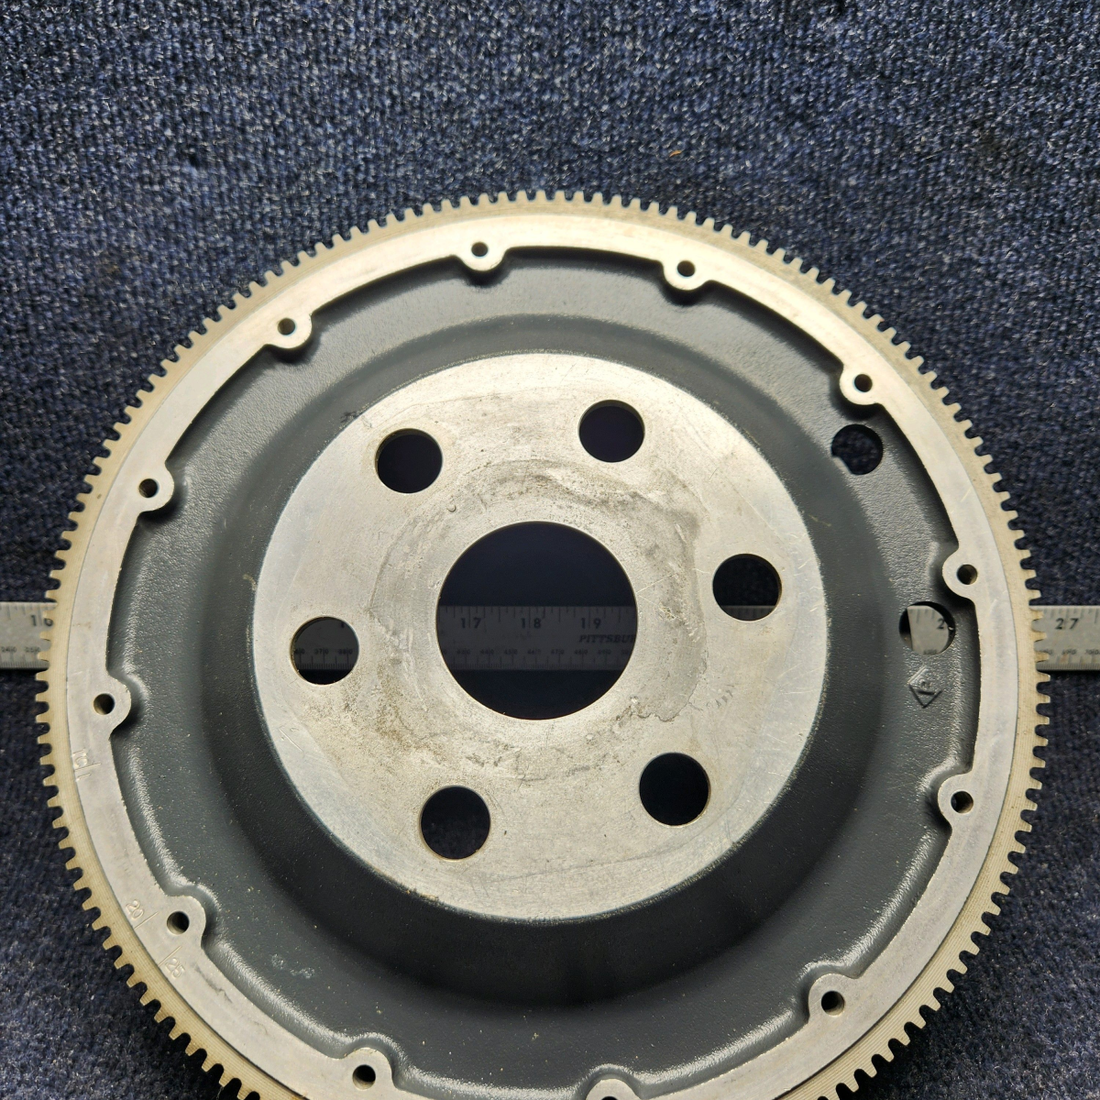 Used aircraft parts for sale, 72245 Lycoming  [part_model] Piper PA32RT-300 STARTER RING (TEETH: 149)